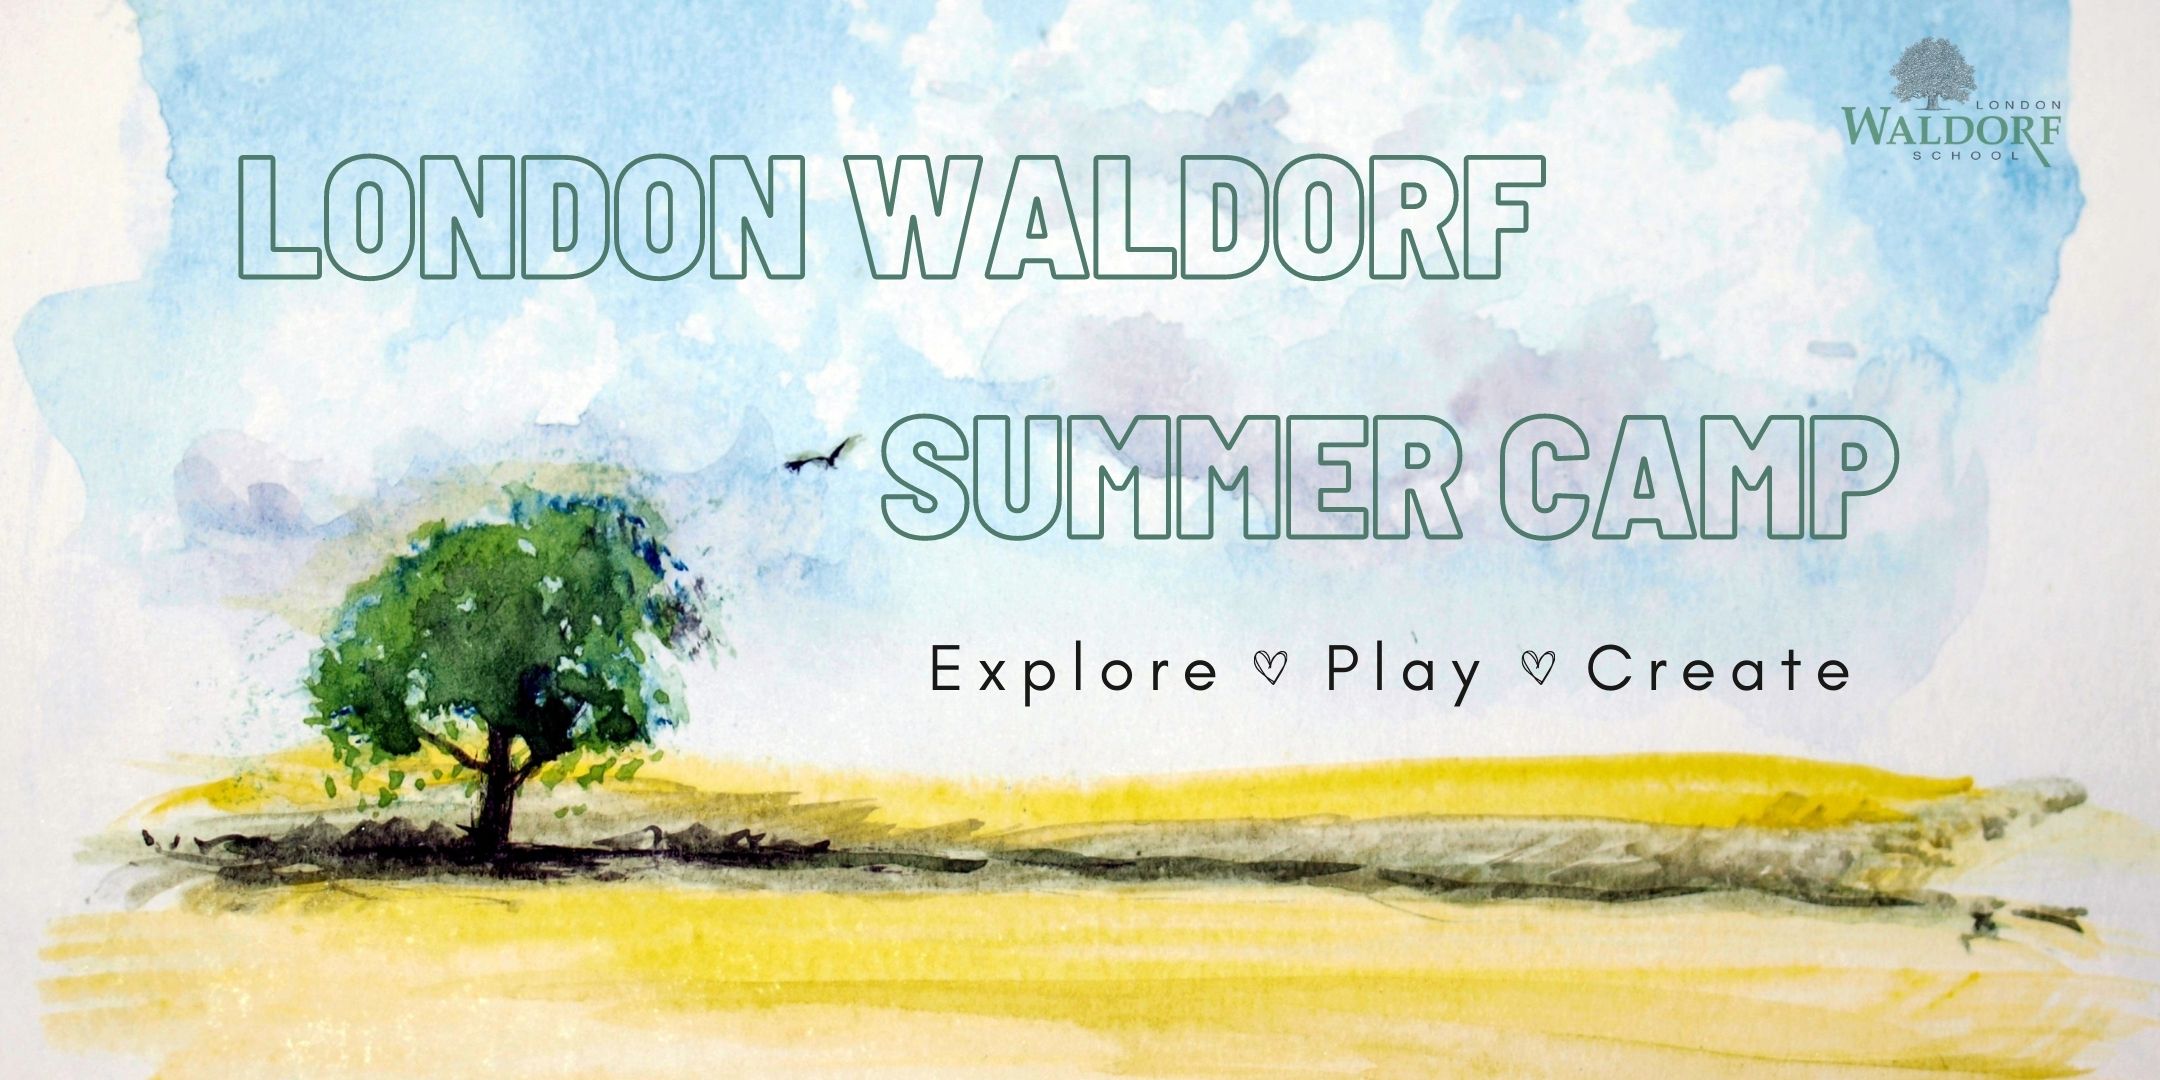 Poster for London Waldorf Summer Camp. watercolour painting of field with one tree and blue skies